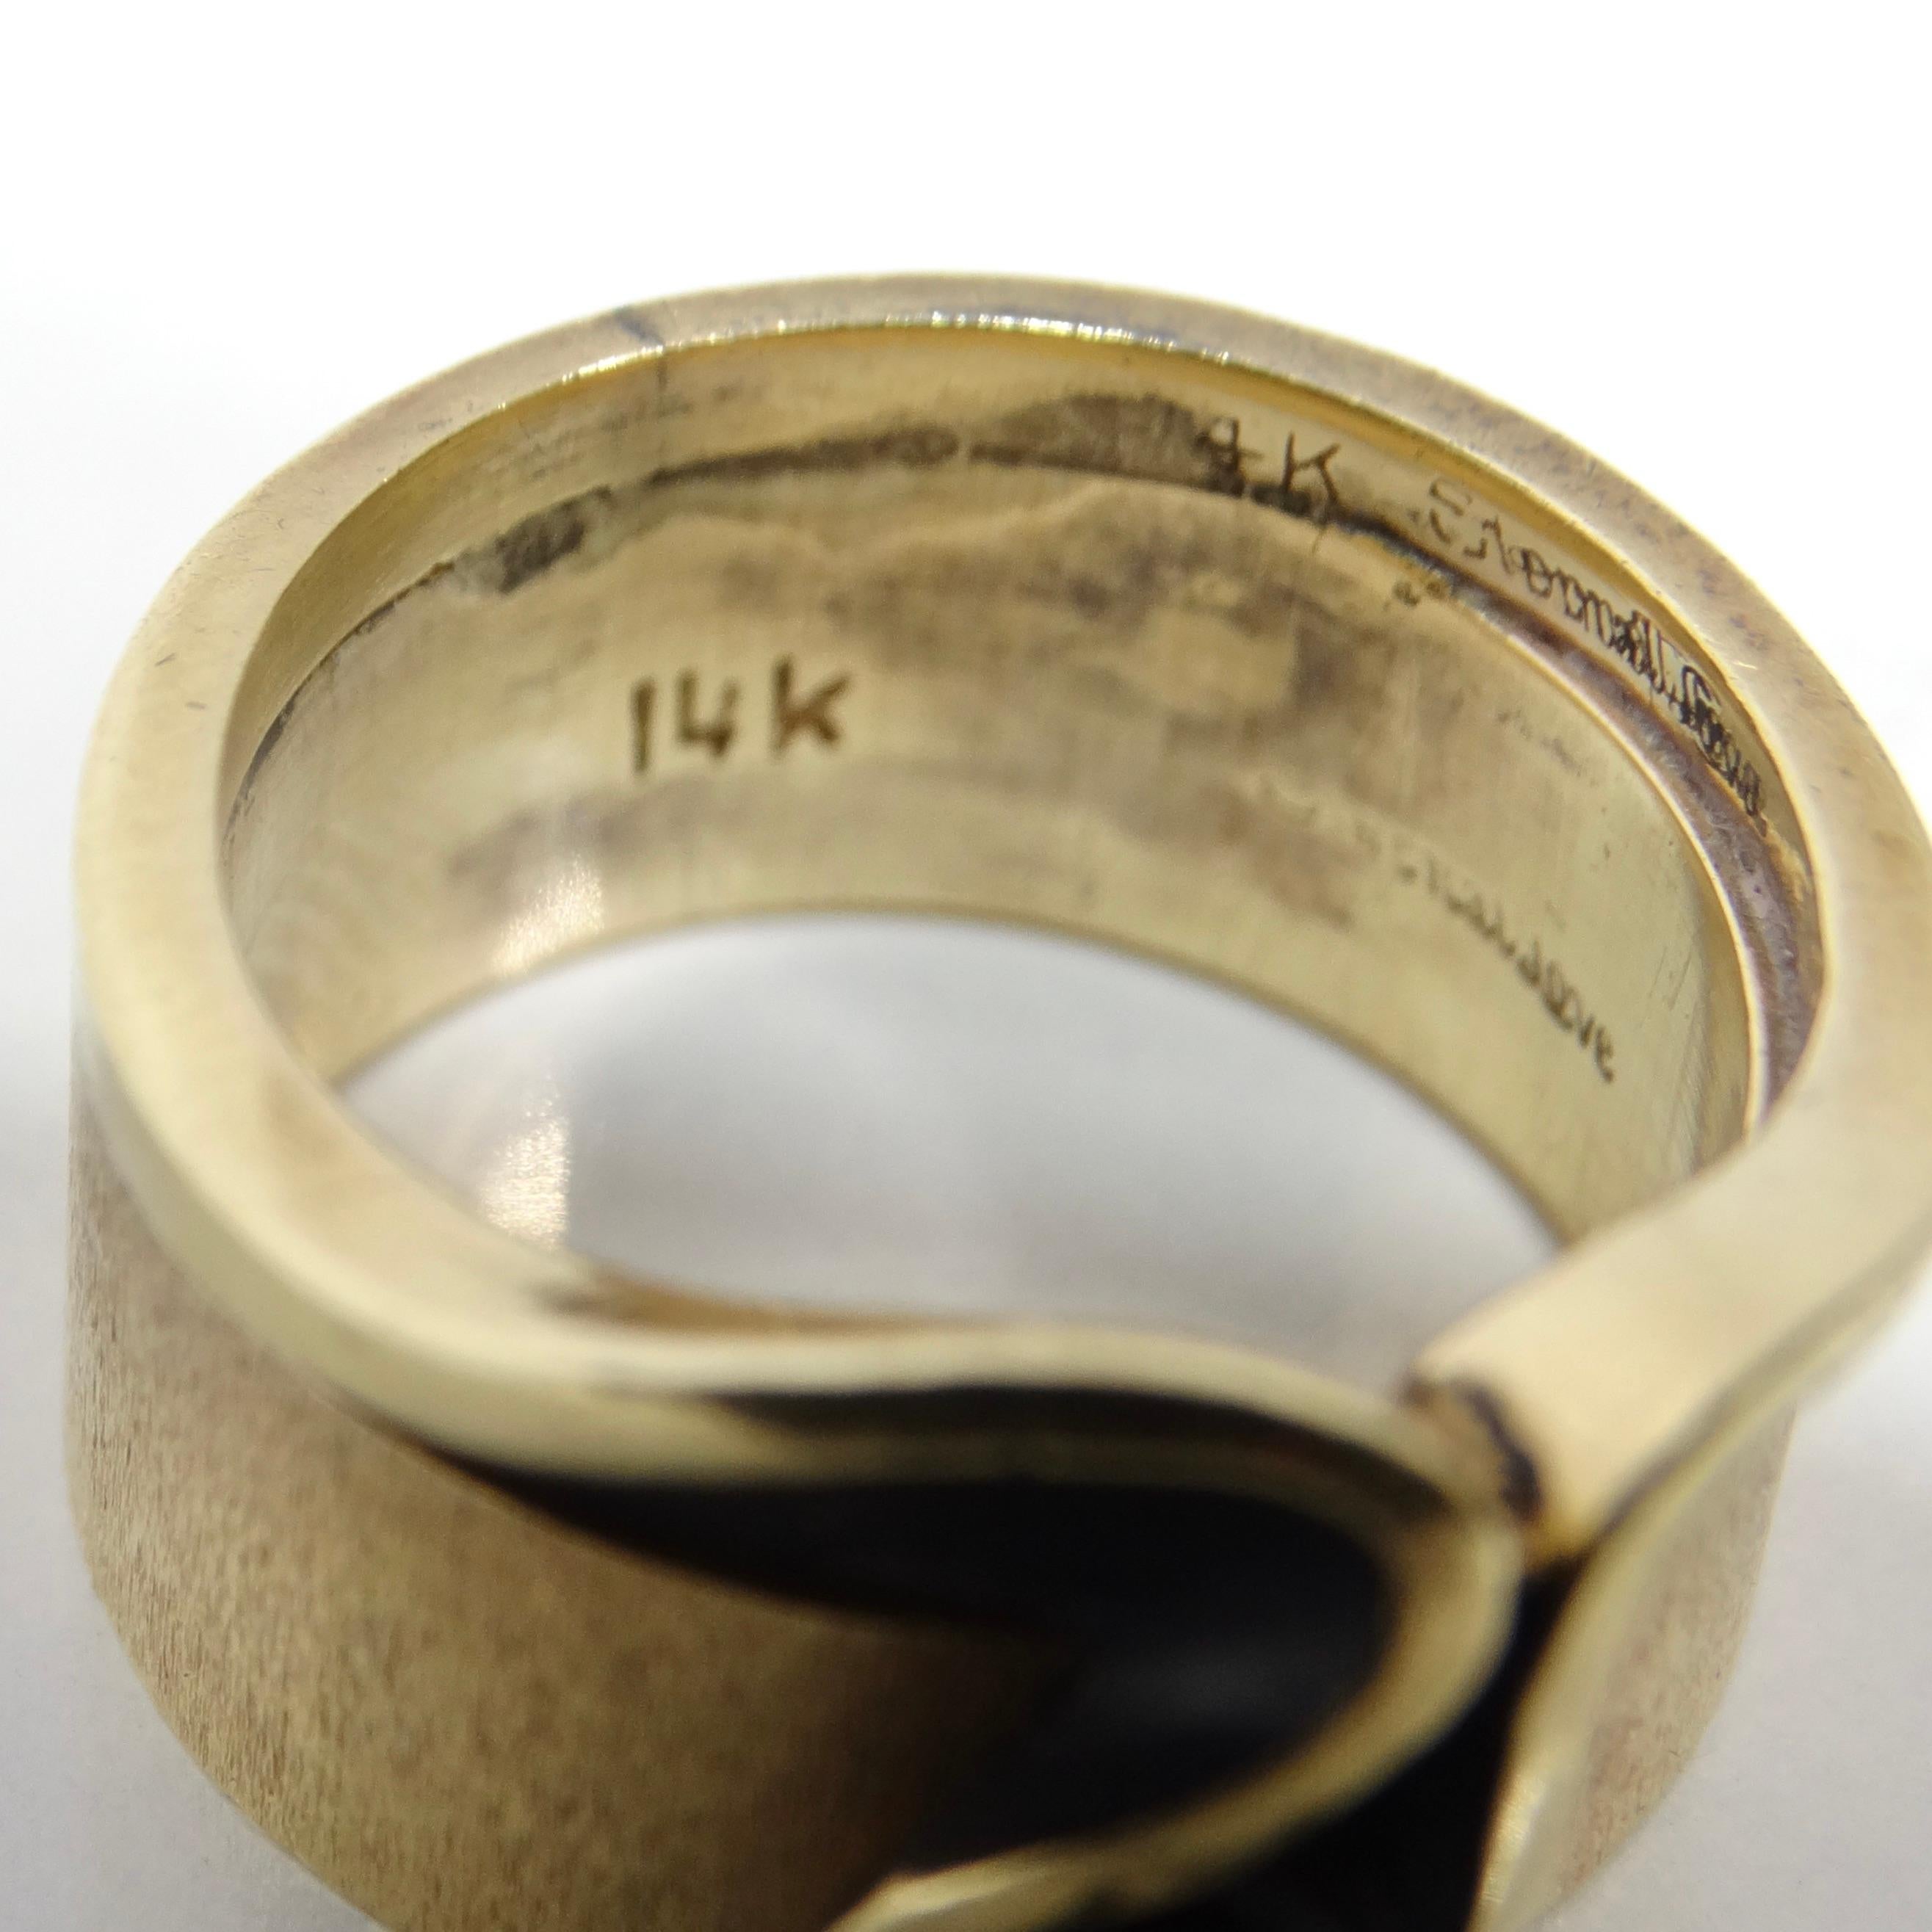 14K Gold 1960s Diamond Ring In Excellent Condition For Sale In Scottsdale, AZ